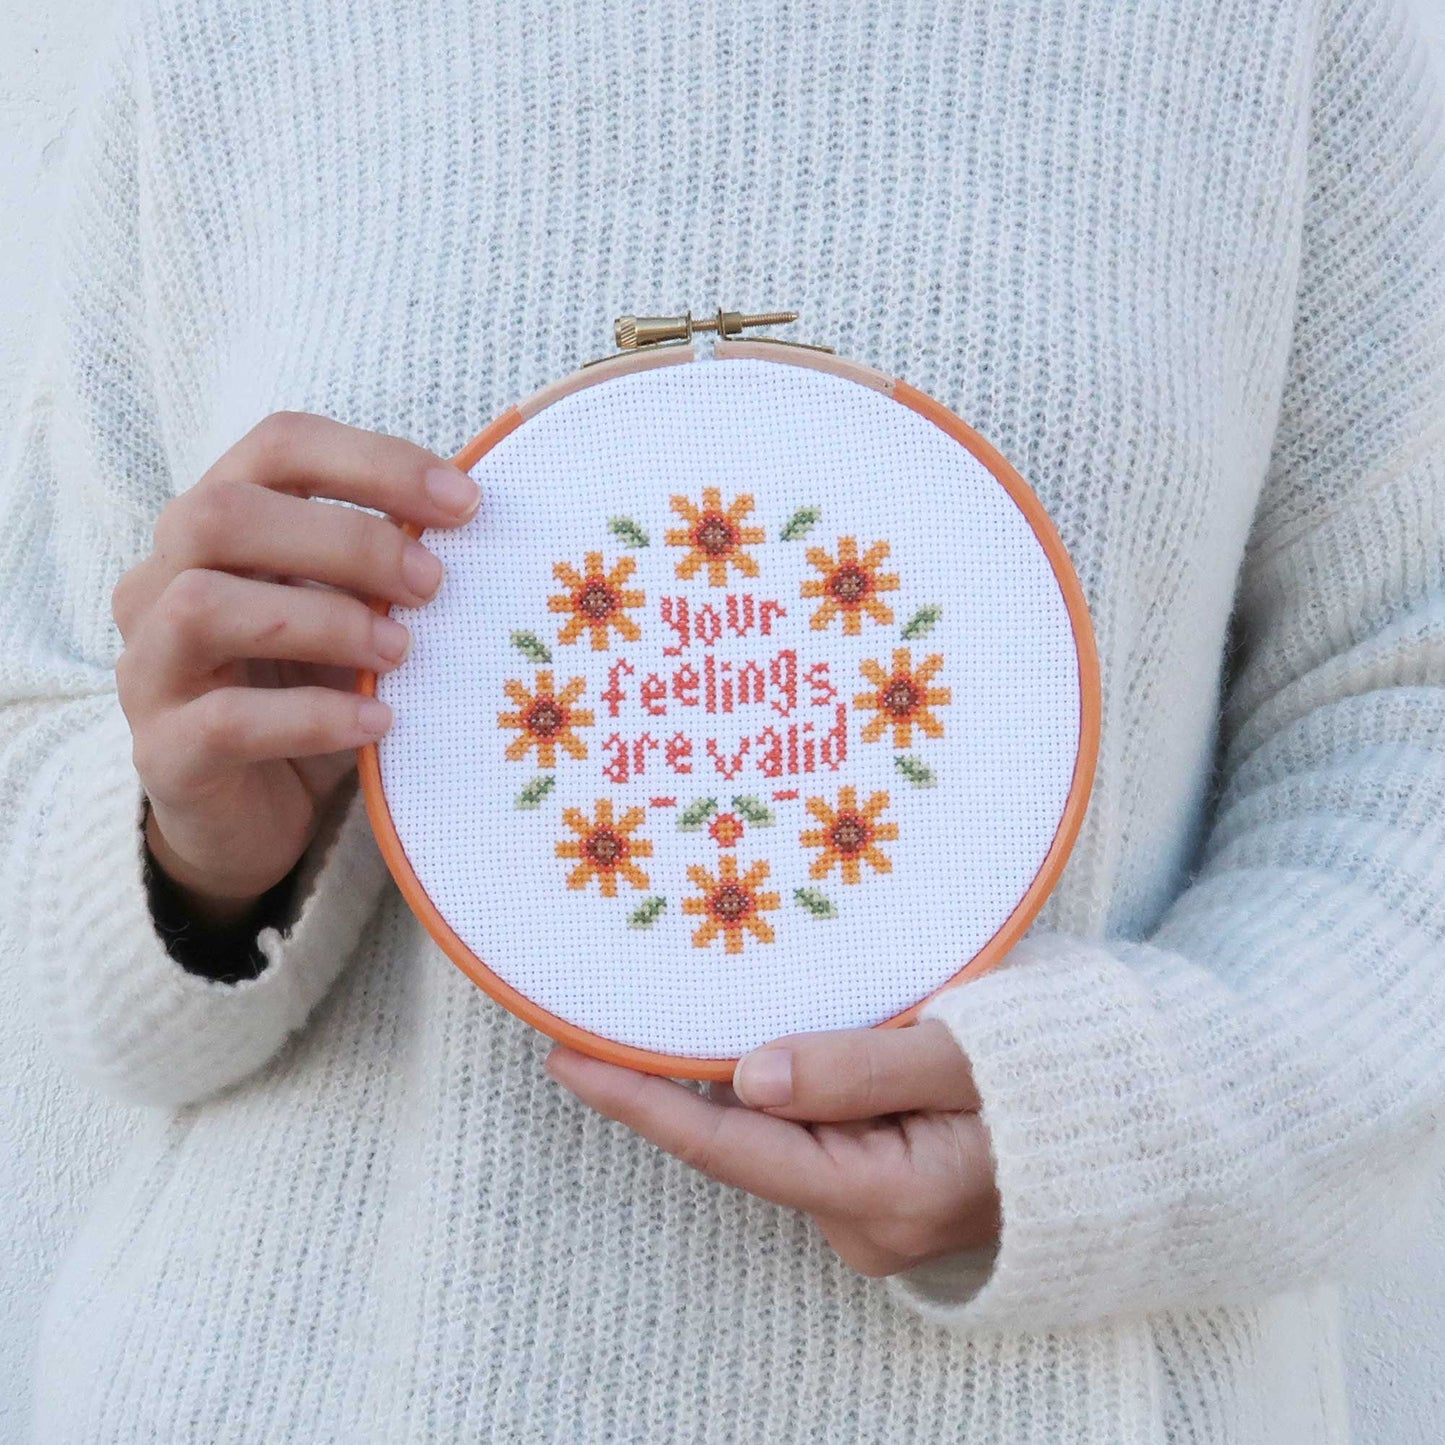 Mental Health Embroidery Kit, Embroidery Kit